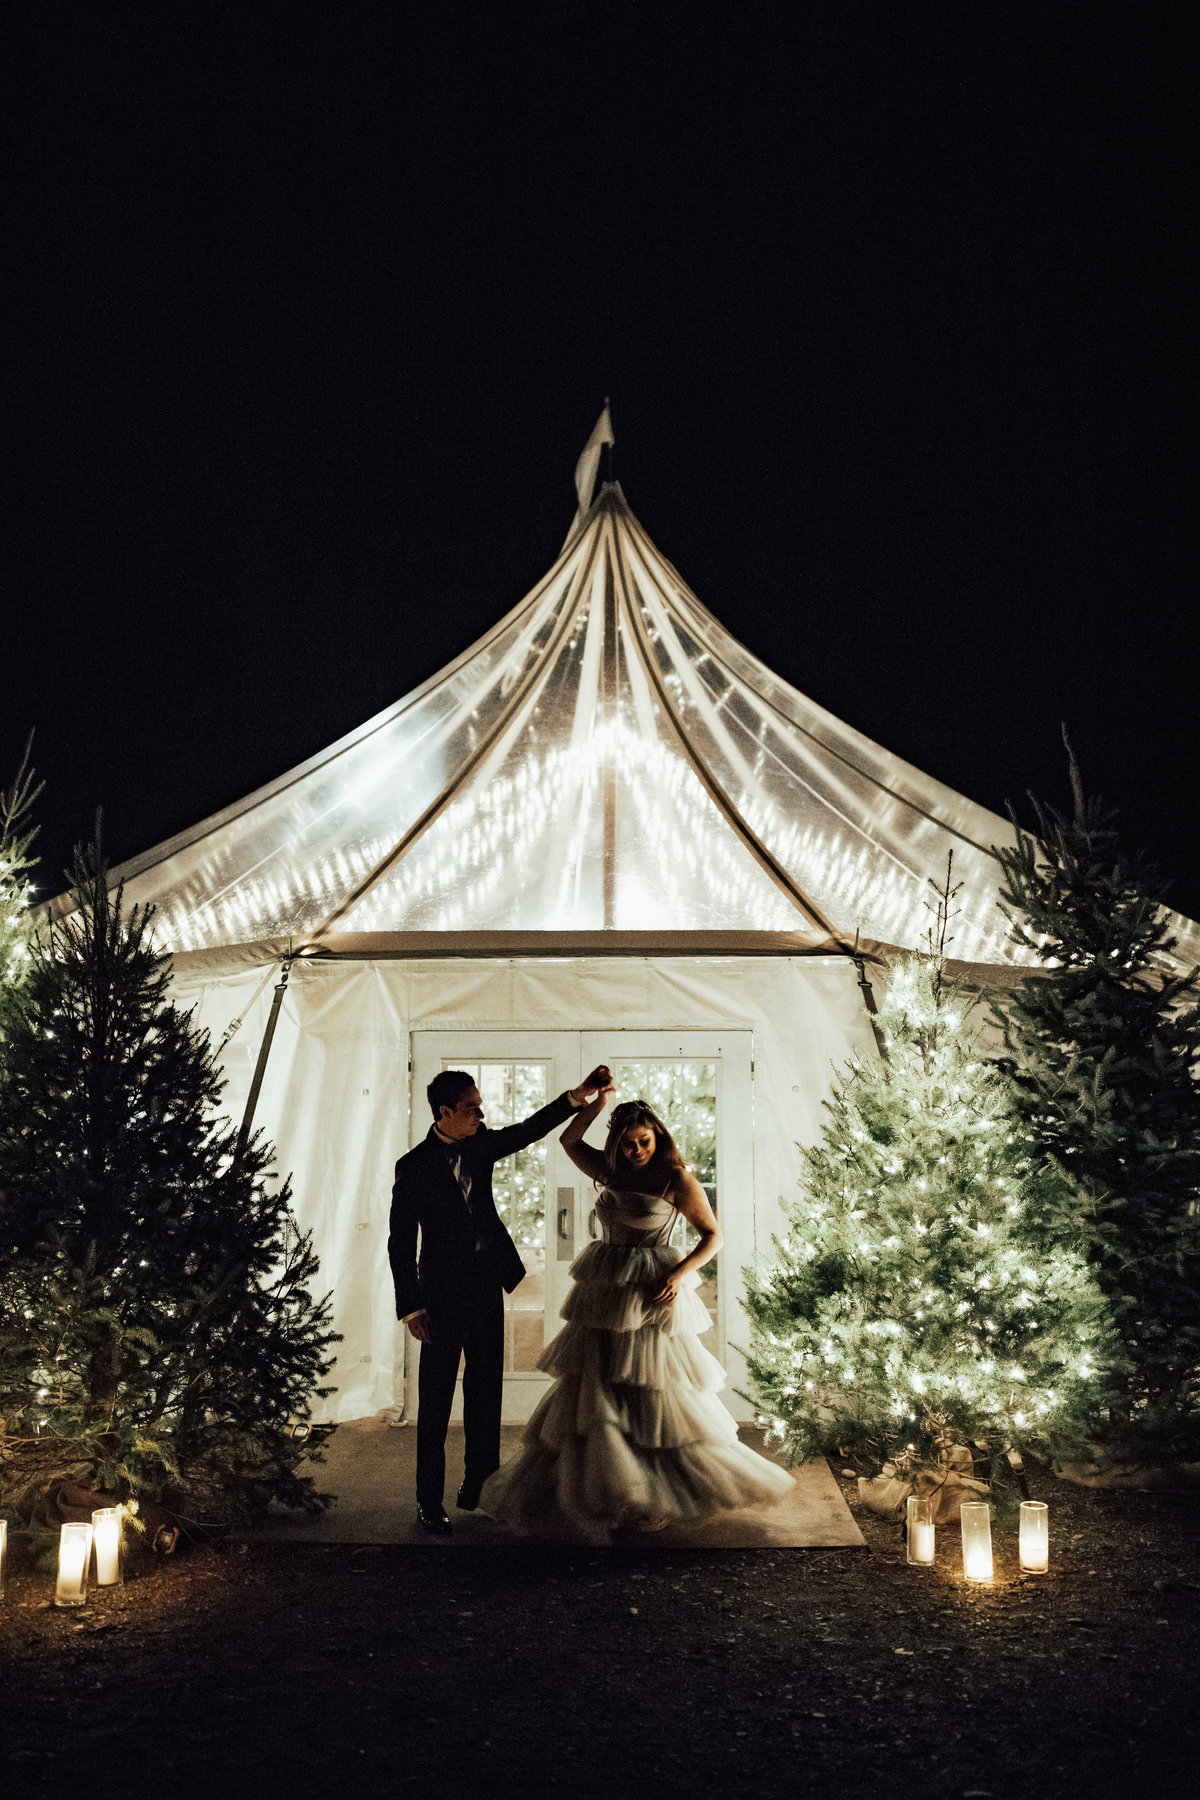 Christy-l-Johnston-Photography-Monica-Relyea-Events-Noelle-Downing-Instagram-Noelle_s-Favorite-Day-Wedding-Battenfelds-Christmas-tree-farm-Red-Hook-New-York-Hudson-Valley-upstate-november-2019-AP1A0392